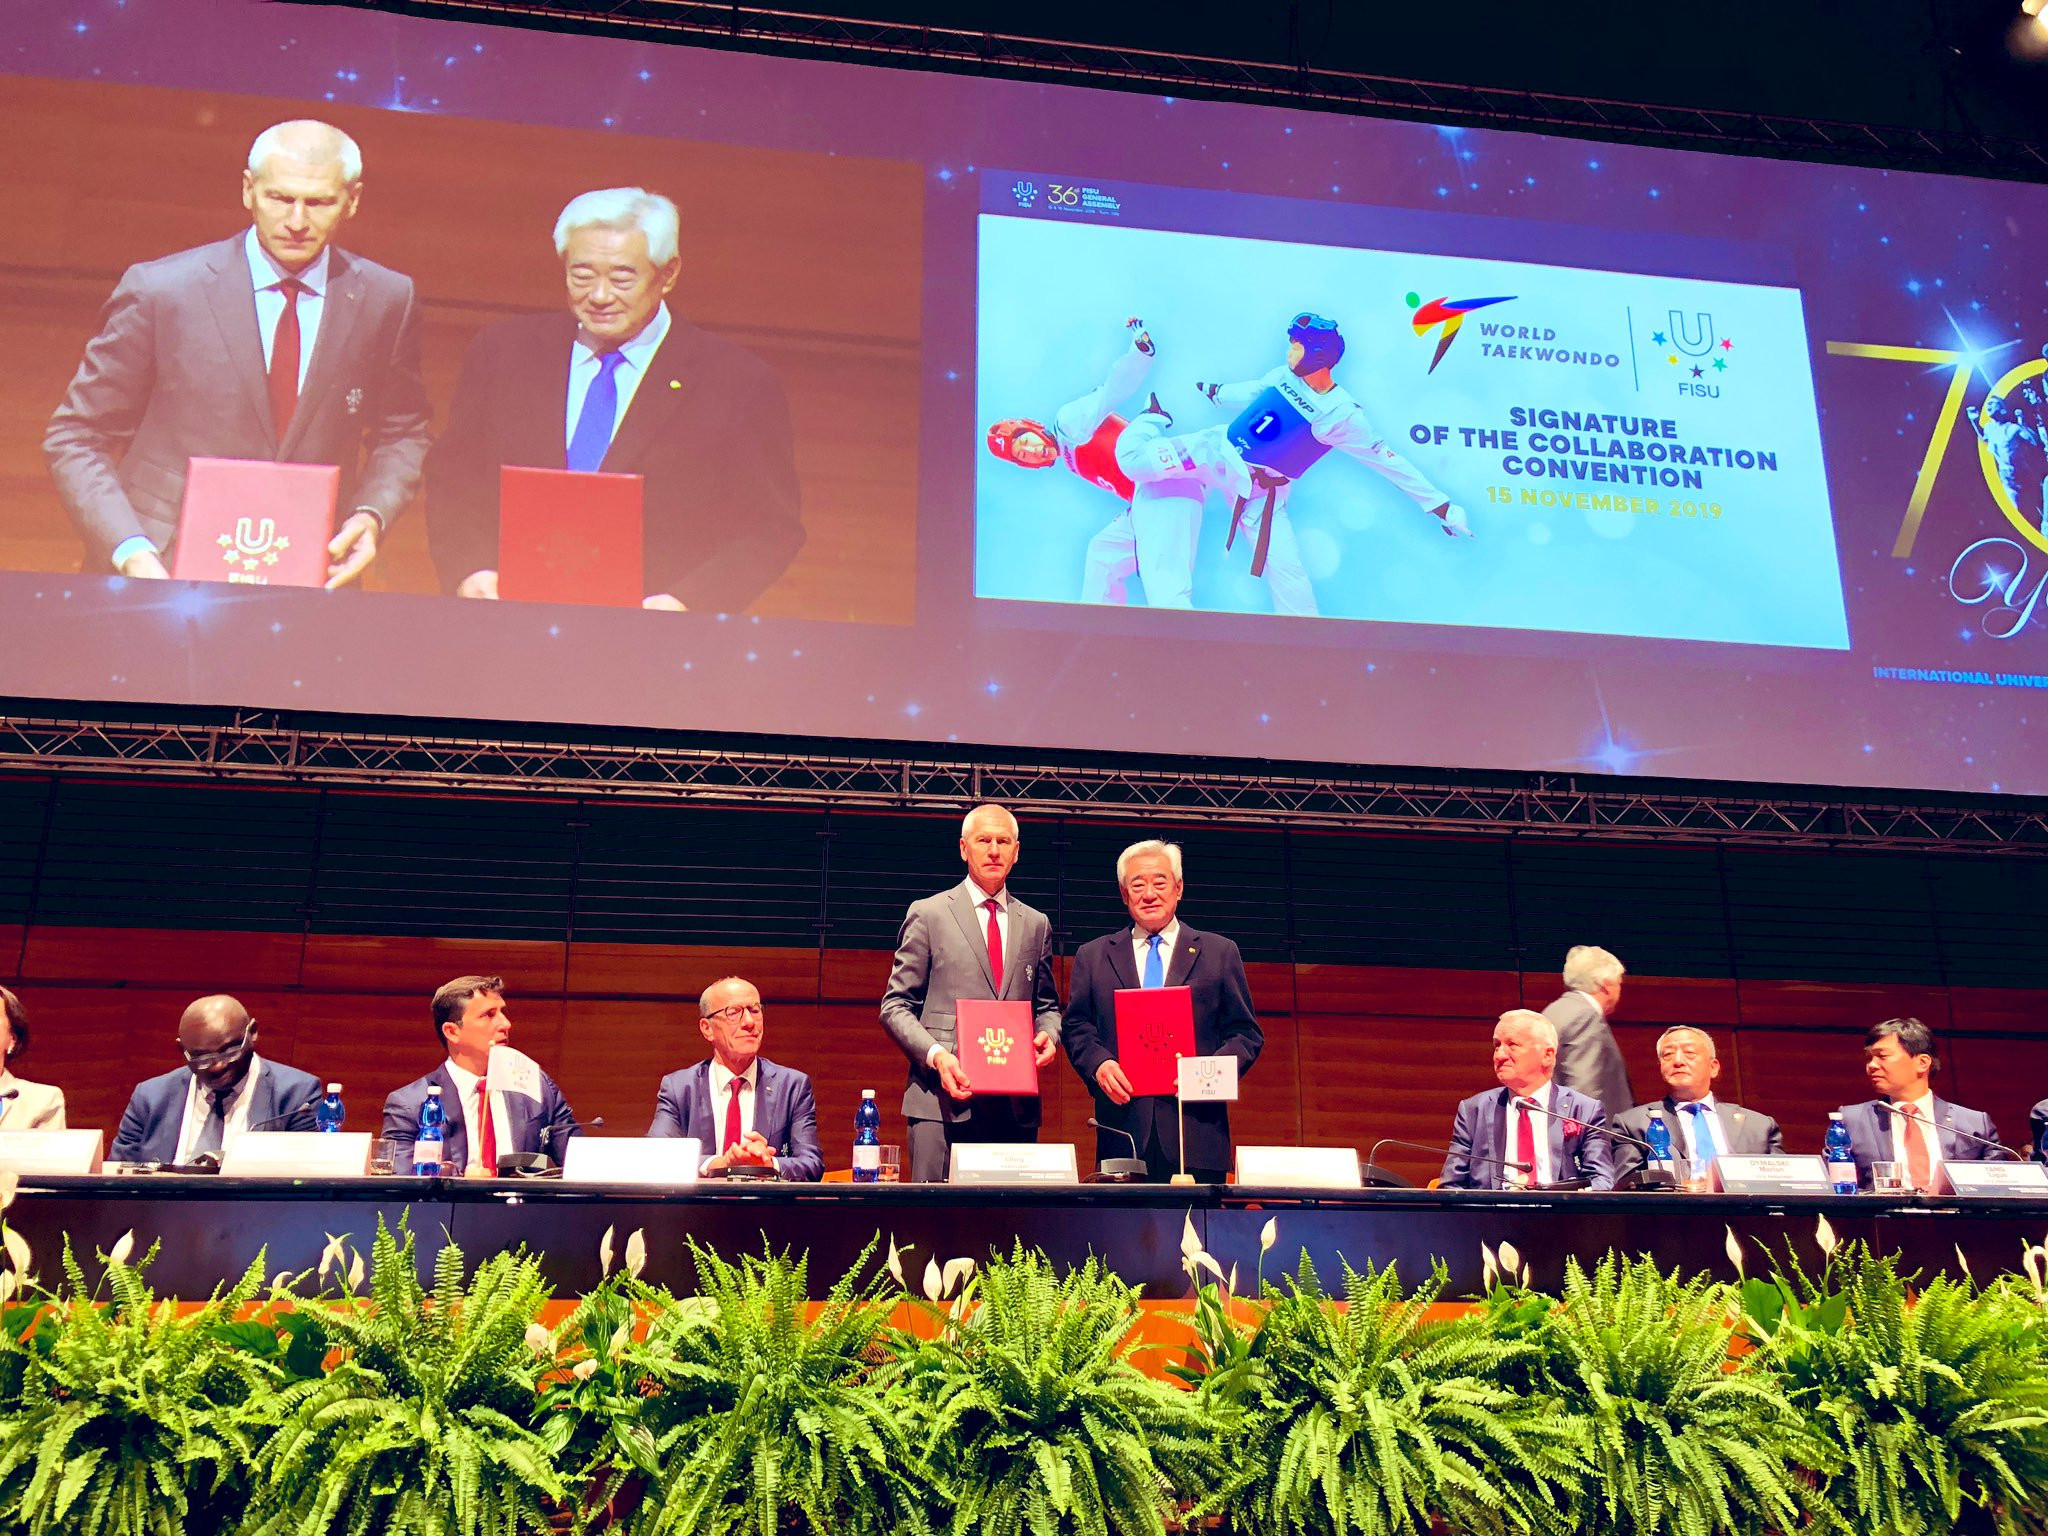 FISU and World Taekwondo are work closely together on a number of projects after Oleg Matytsin and Choue Chung-won signed an agreement ©World Taekwondo